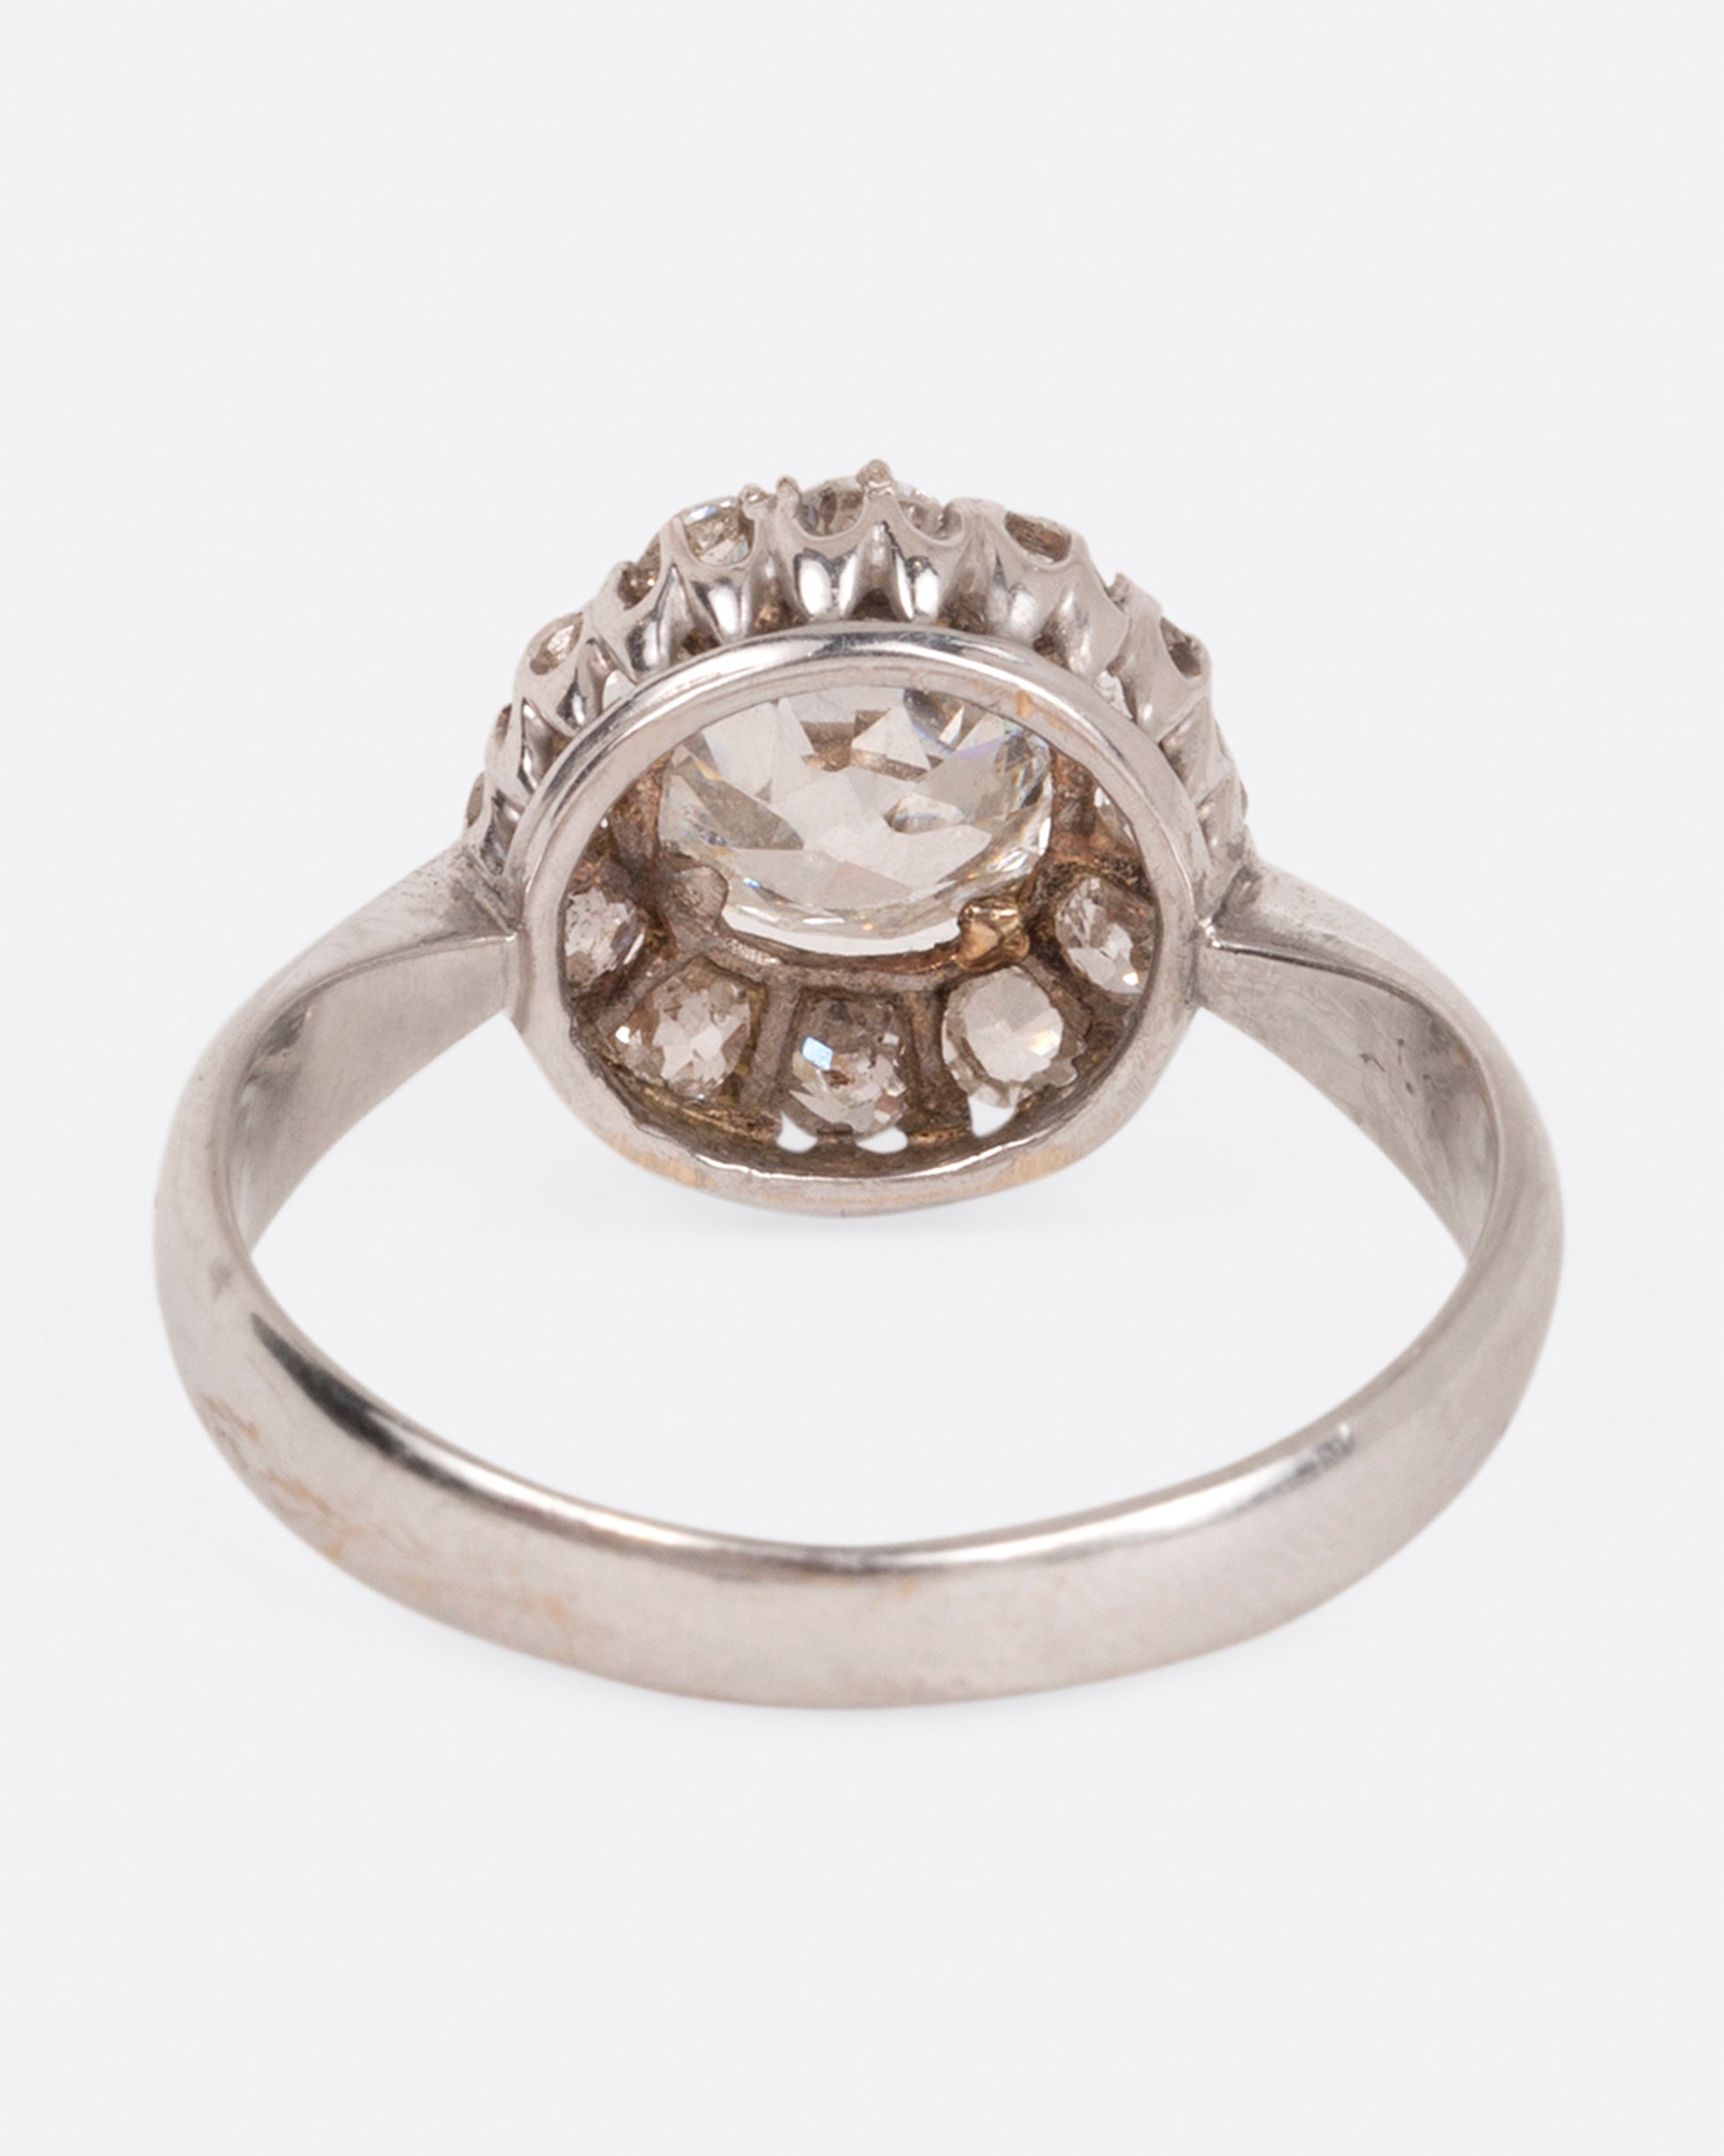 A white gold ring with a tapered band and a flower-shaped cluster of diamonds, shown from the back.